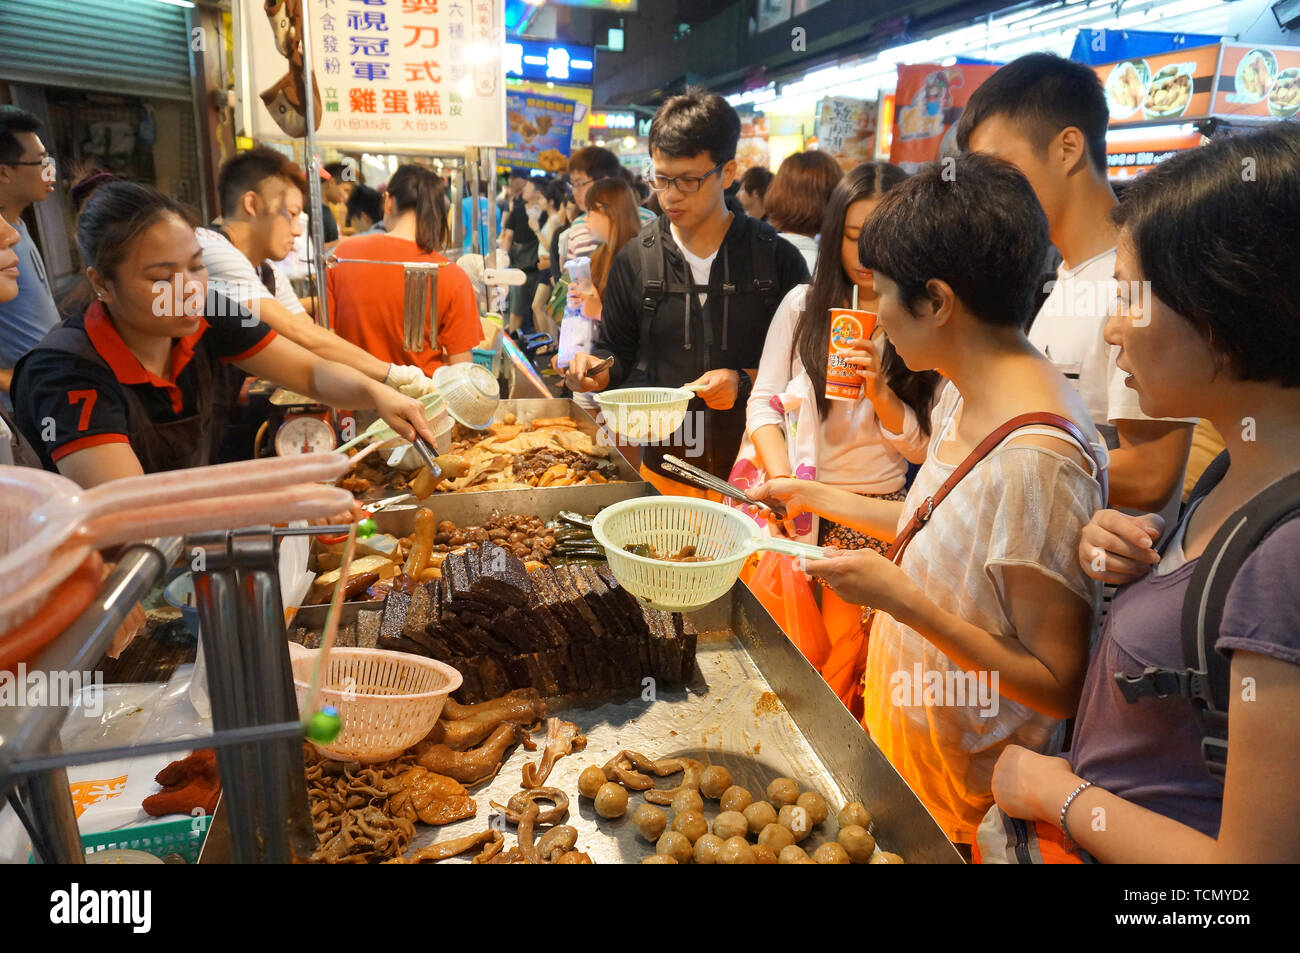 TAIPEI, TAIWAN - JULY 13, 2013: Customers ordering Chinese street food consisting of braised beef and pork entrails in Taipei's Shilin Night Market, t Stock Photo